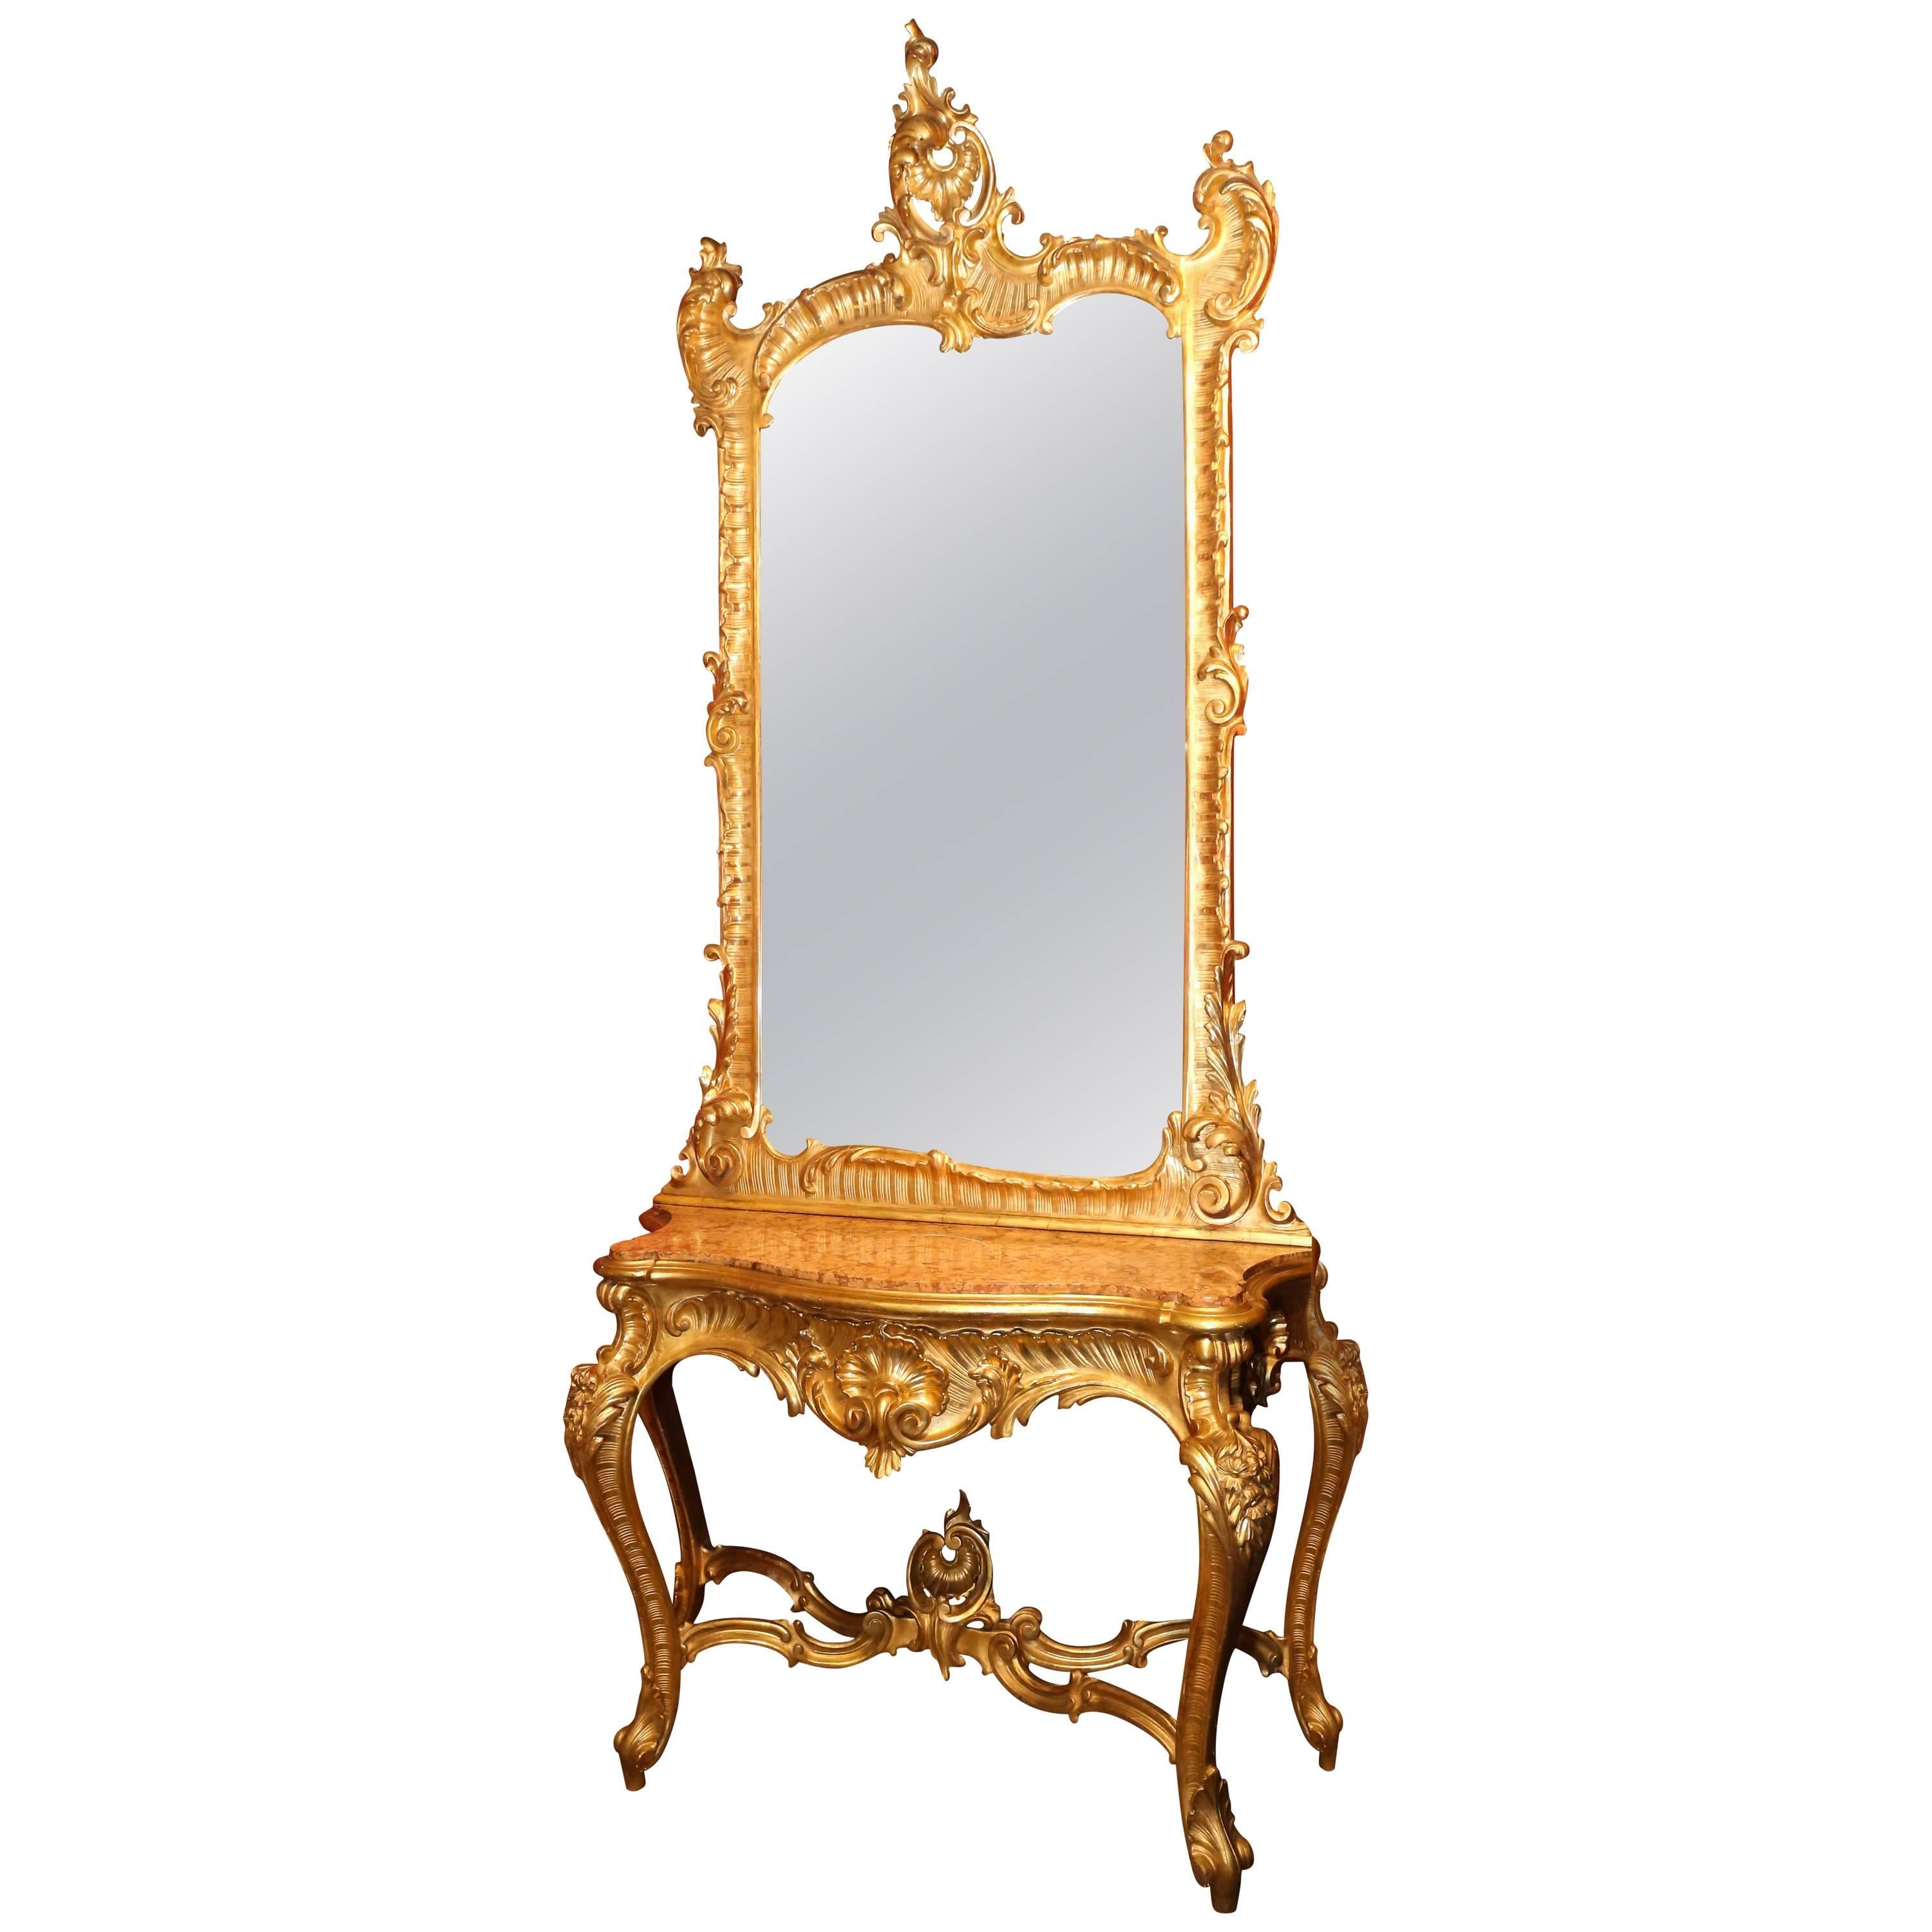 Giltwood Console with Mirror, Rococo Style, Marble top